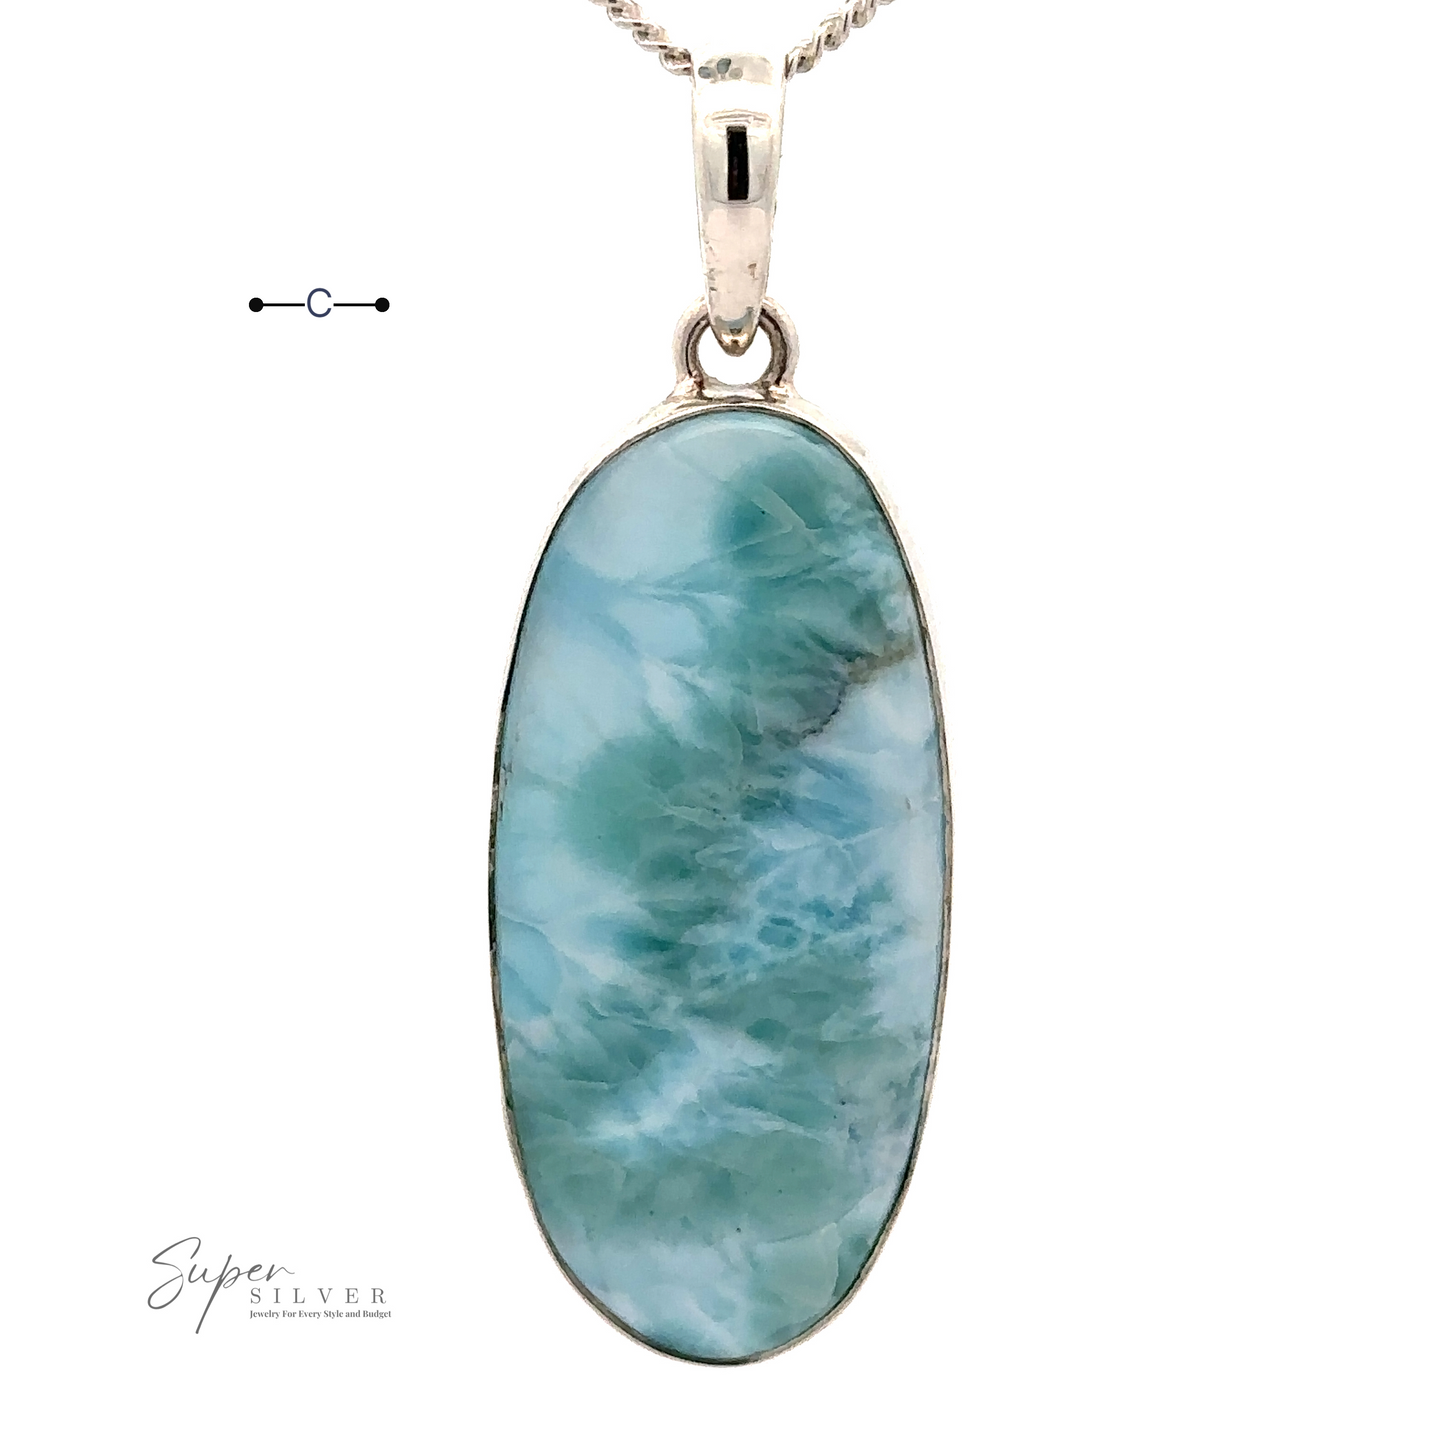 
                  
                    A Beautiful Long Oval Larimar Pendant with a marbled pattern, set in a .925 Sterling Silver frame and hung on a chain. The image has the brand name "Super Silver" in the lower-left corner.
                  
                